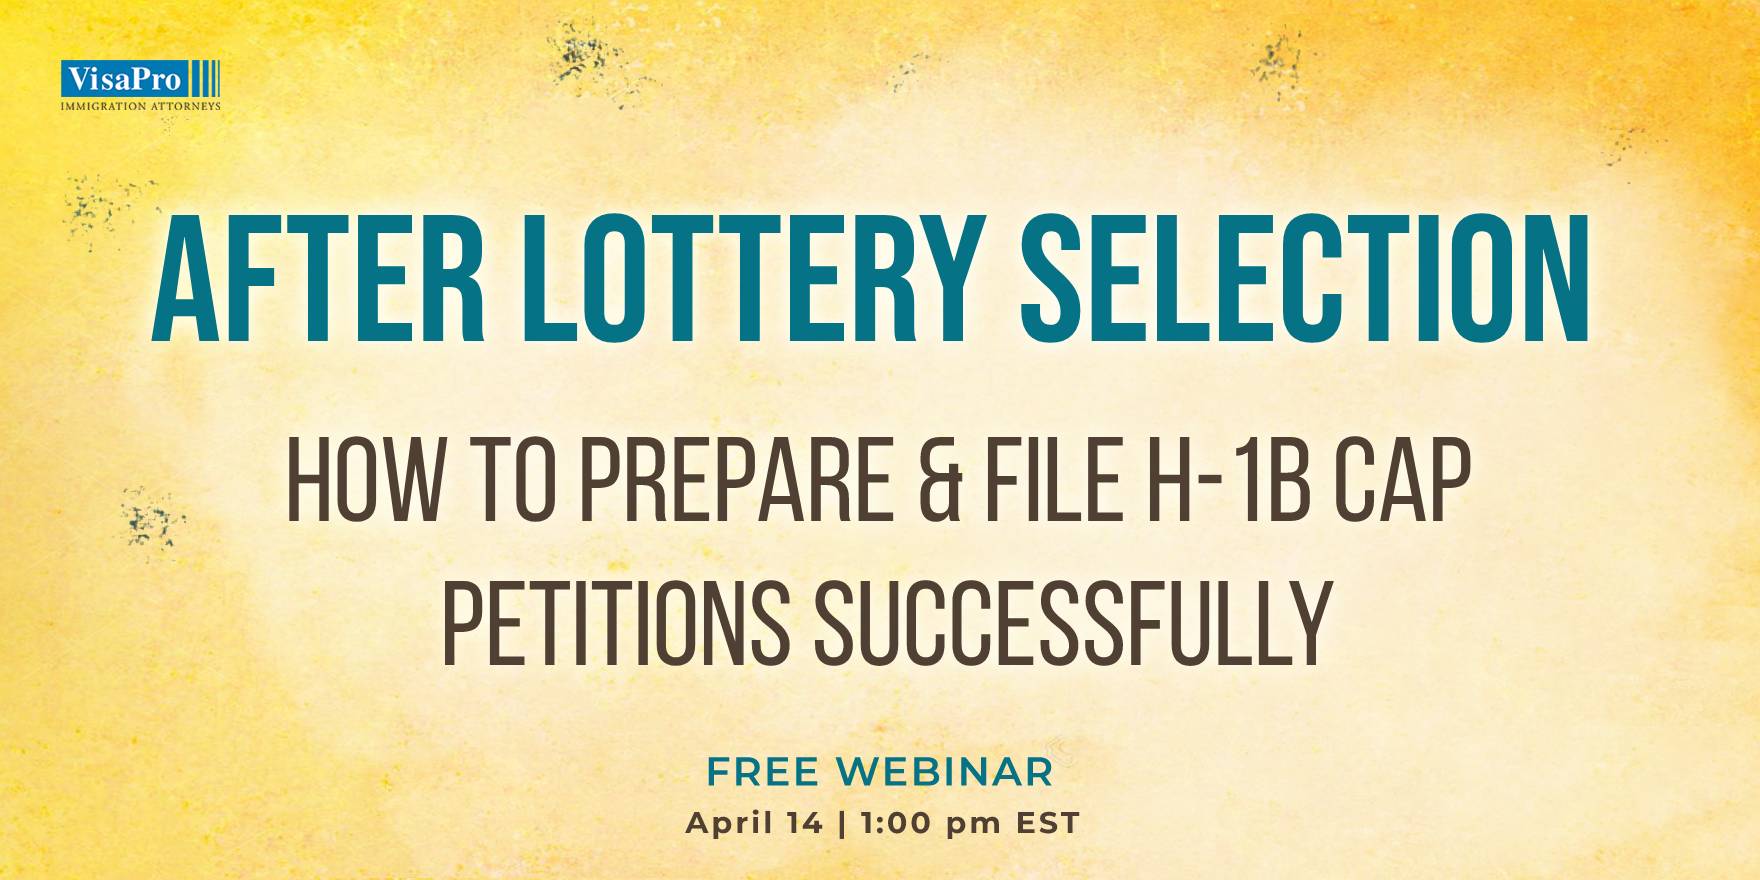 After Lottery Selection: How To Prepare & File H-1B Cap Petitions Successfully, Washington,Washington, D.C,United States